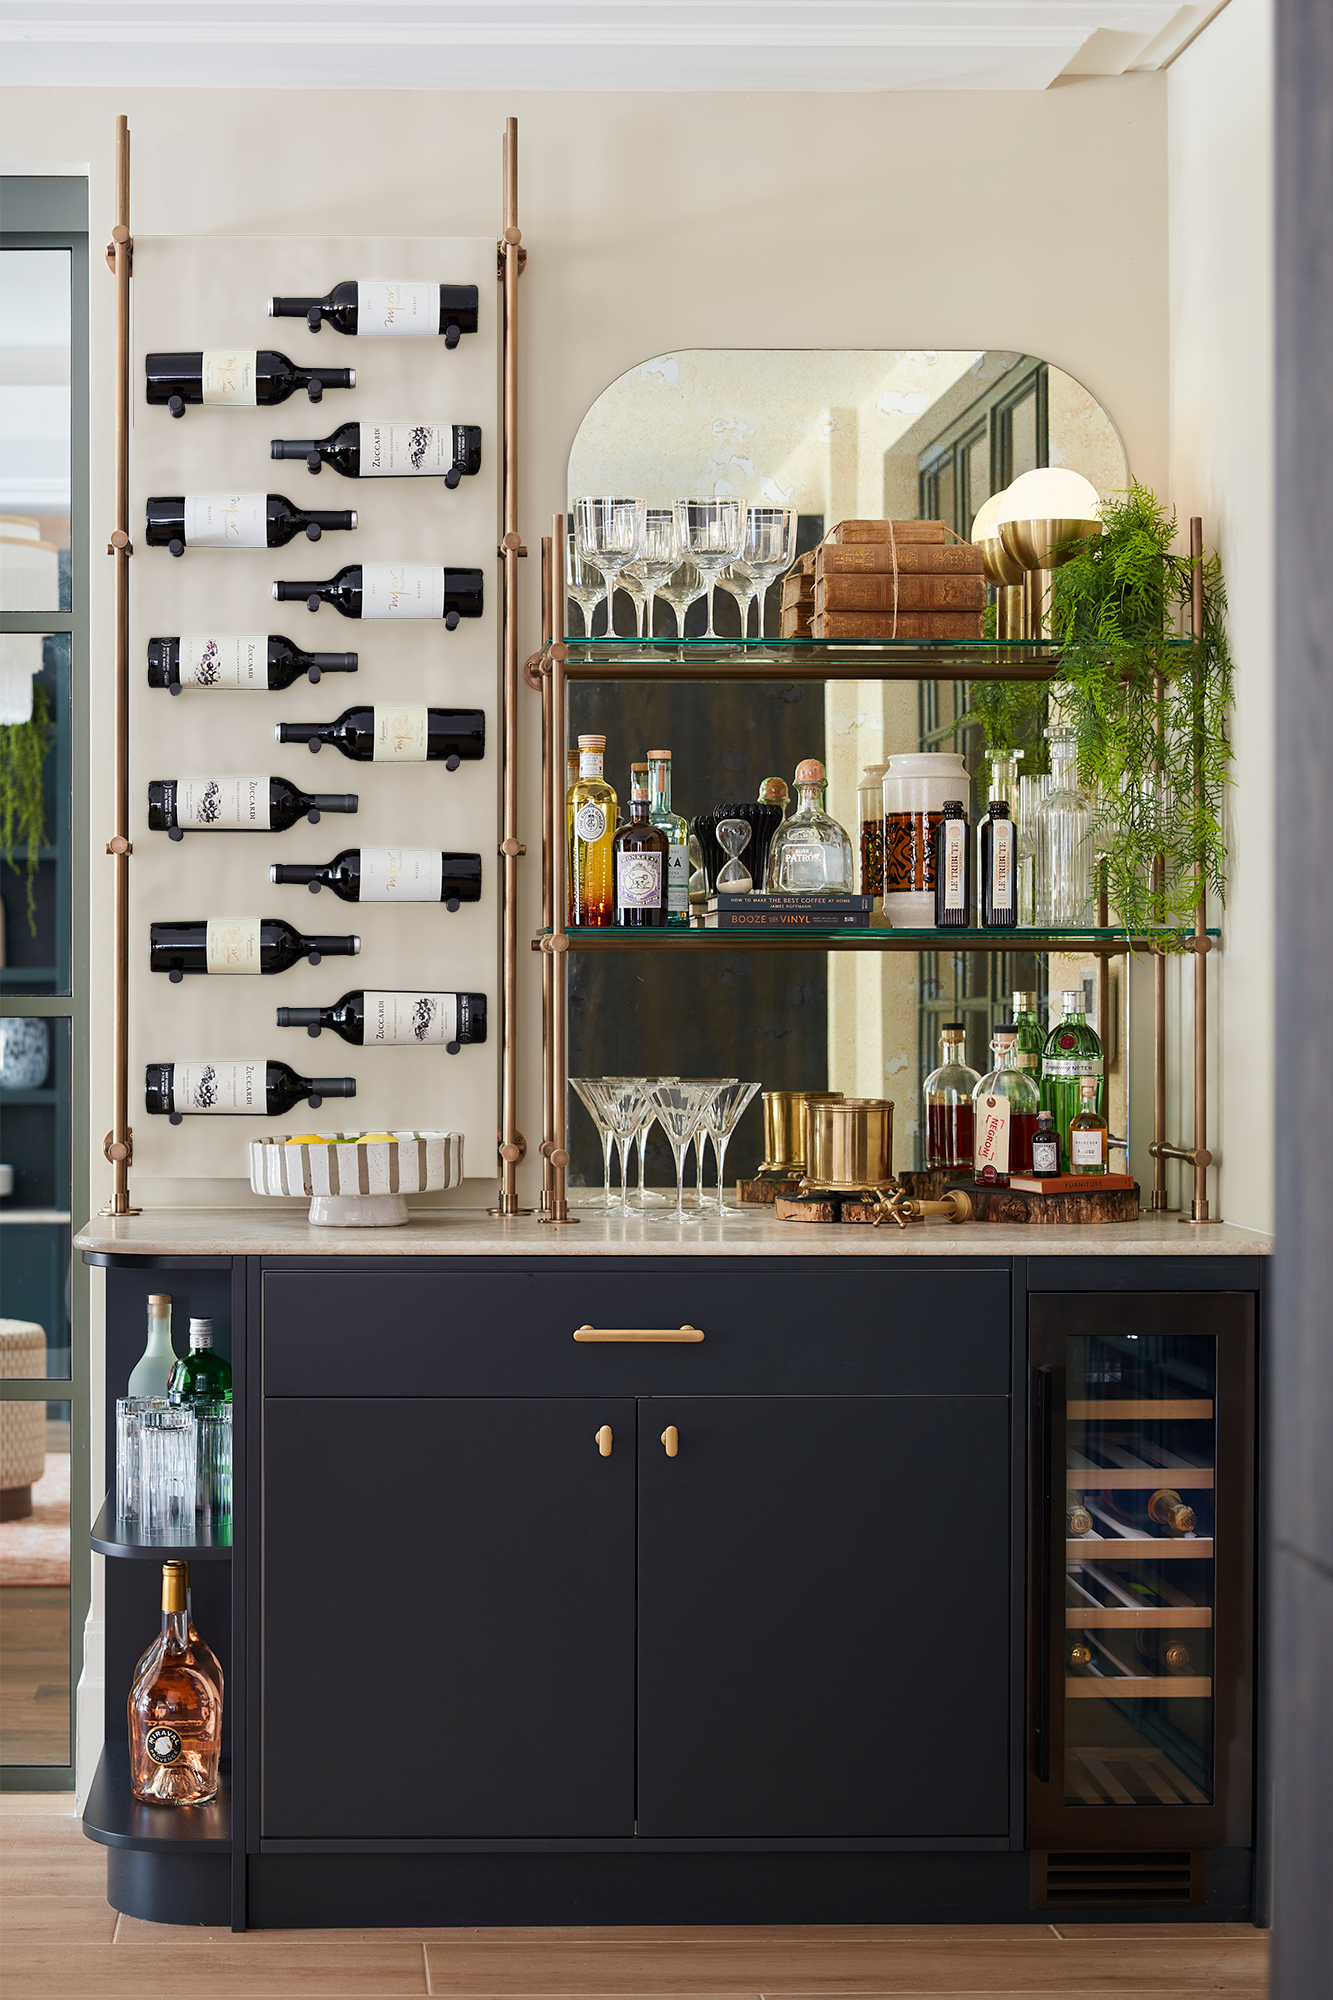 Raise the Bar: Transforming Your Kitchen
with a Stylish and Functional Bar Setup